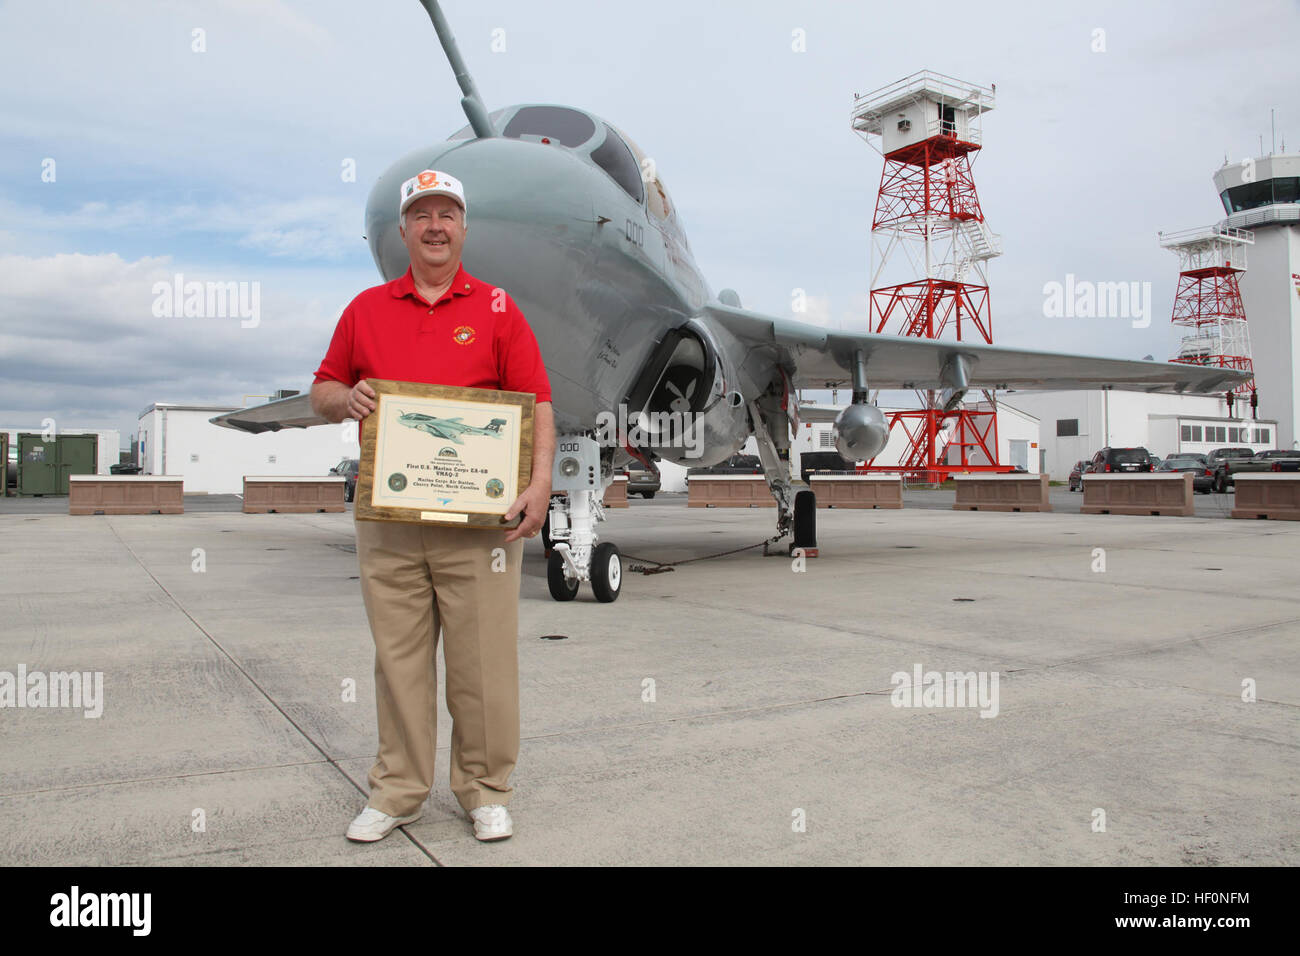 Retired Col. Wayne Whitten holds a plaque commemorating the delivery of the first EA-6B Prowler to MCAS Cherry Point, which took place Feb. 17, 1977. Whitten was a member of the aircrew that delivered the aircraft here 35 years ago. The Prowler behind him is the same he delivered to Cherry Point and the only EA-6B to never serve in a Navy electronic warfare squadron. Prowlers celebrate 35 years of service 120217-M-AF823-016 Stock Photo